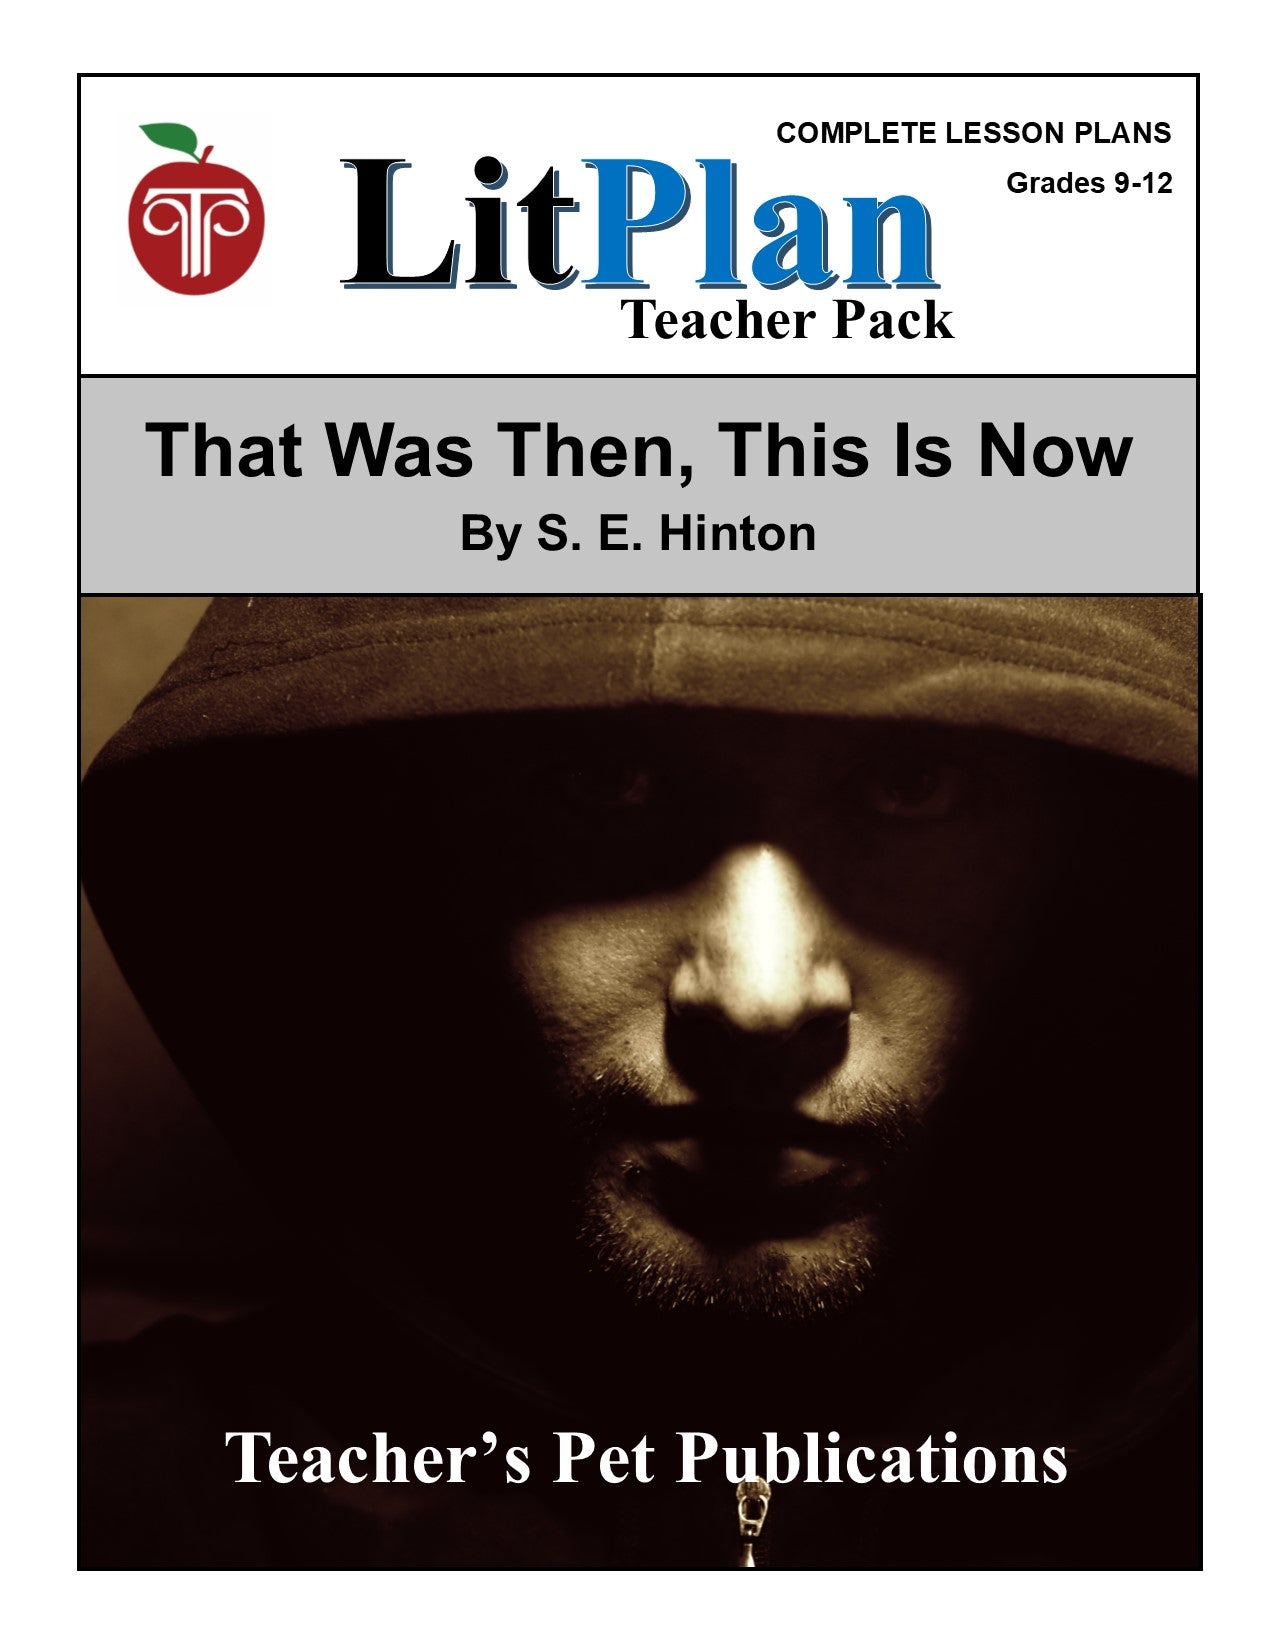 That Was Then, This is Now: LitPlan Teacher Pack Grades 9-12